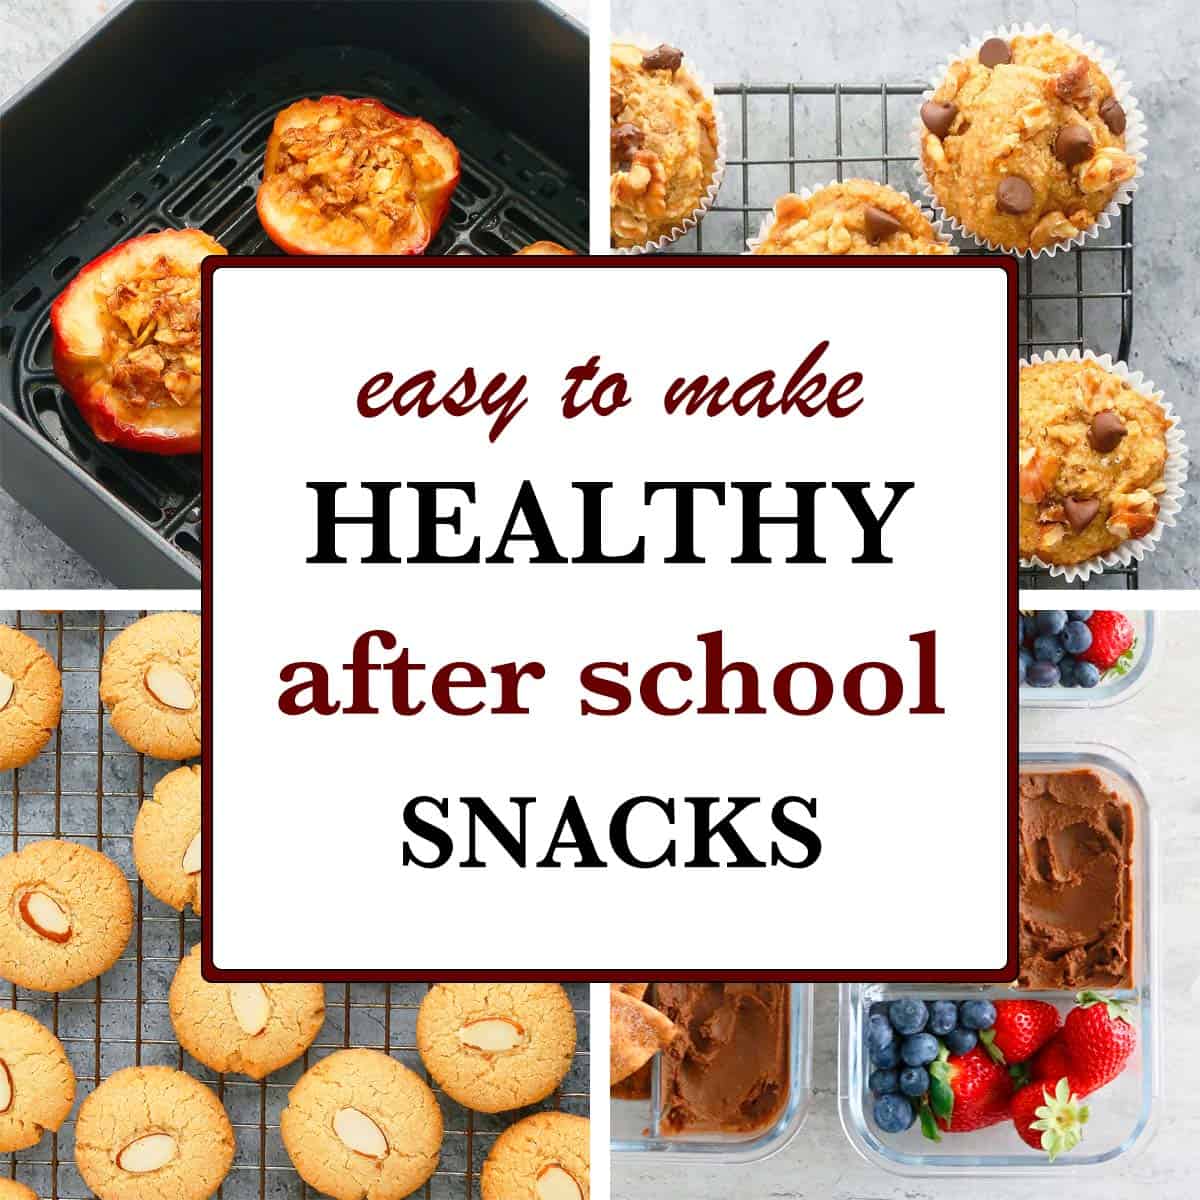 EASY TO MAKE HEALTHY AFTER SCHOOL SNACKS